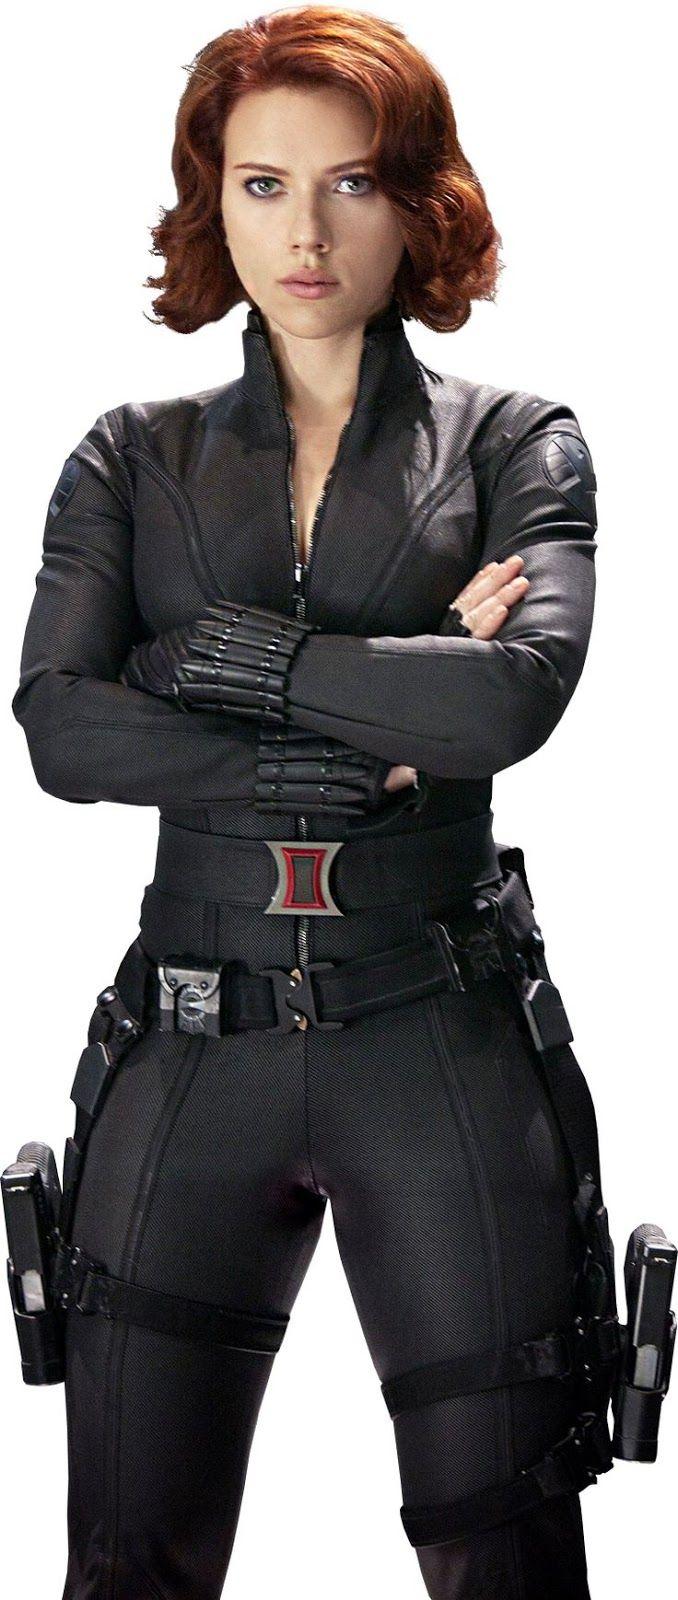 Hawkeye/Black Widow : Black leather costume with belt and